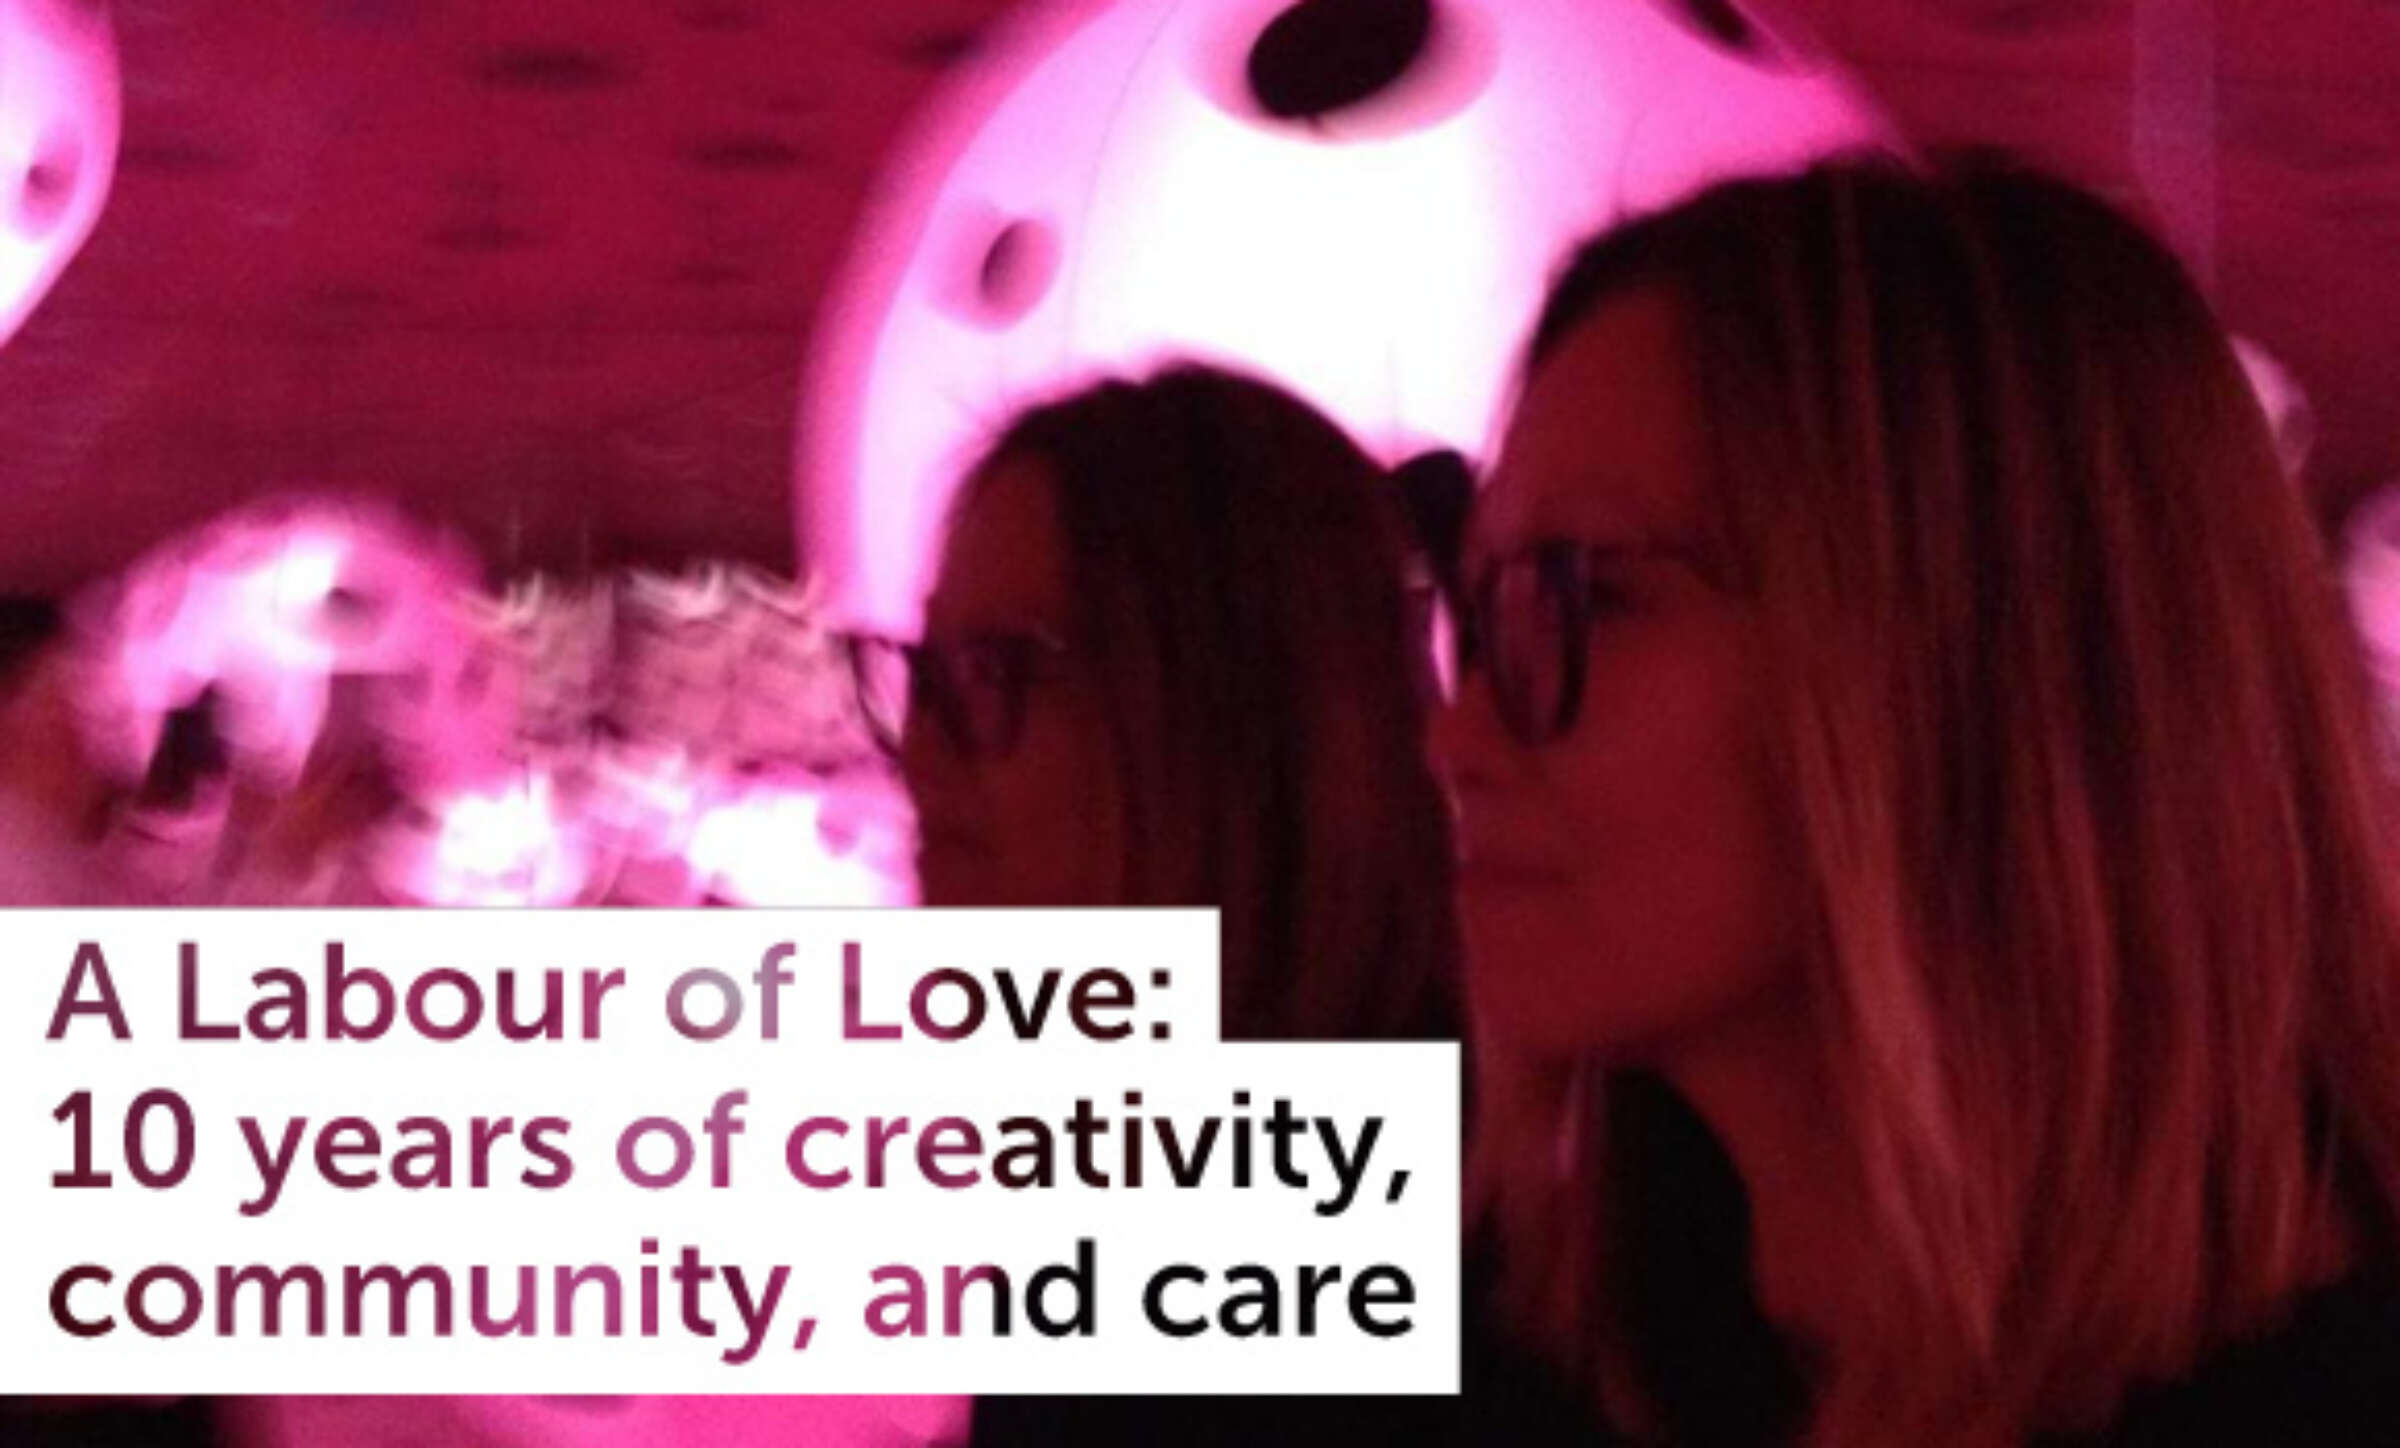 A person with shoulder-length hair and glasses is looking ahead in a pink-lit environment. Text overlay reads: "A Labour of Love: 10 years of creativity, community, and care.